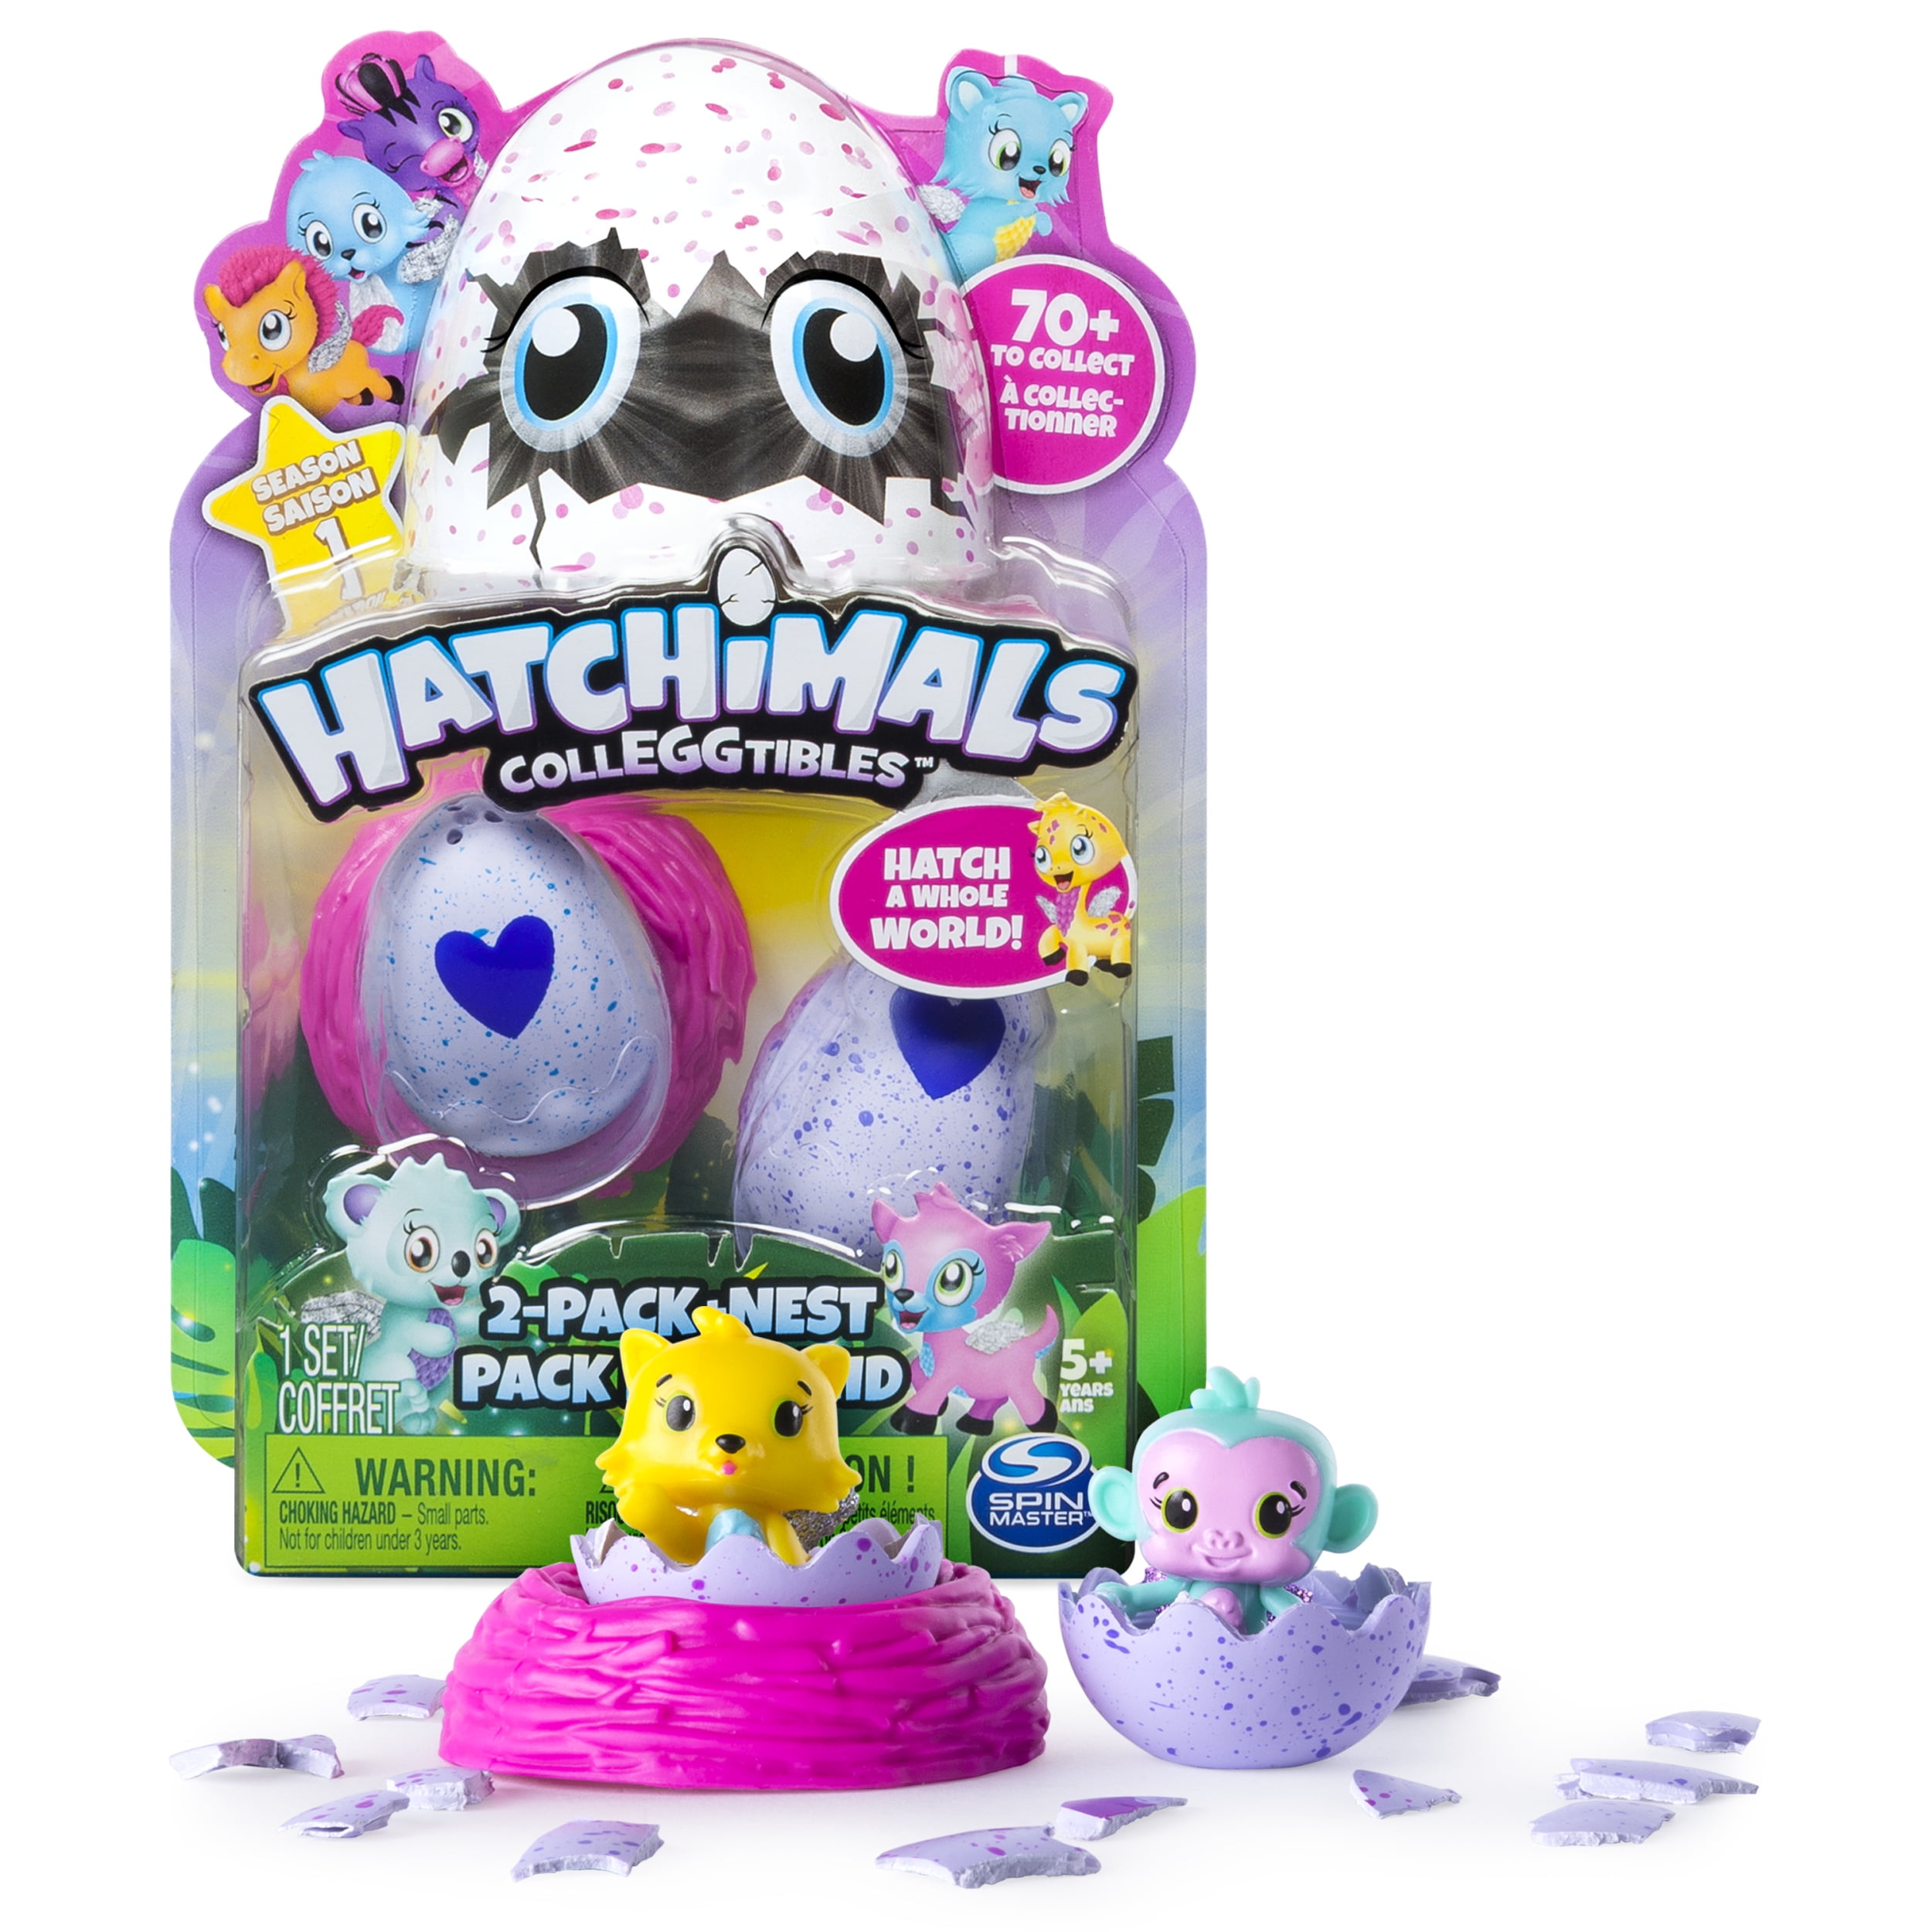 Lot of Three 1-Pack Hatchimals Season 1 Great for Easter Baskets 